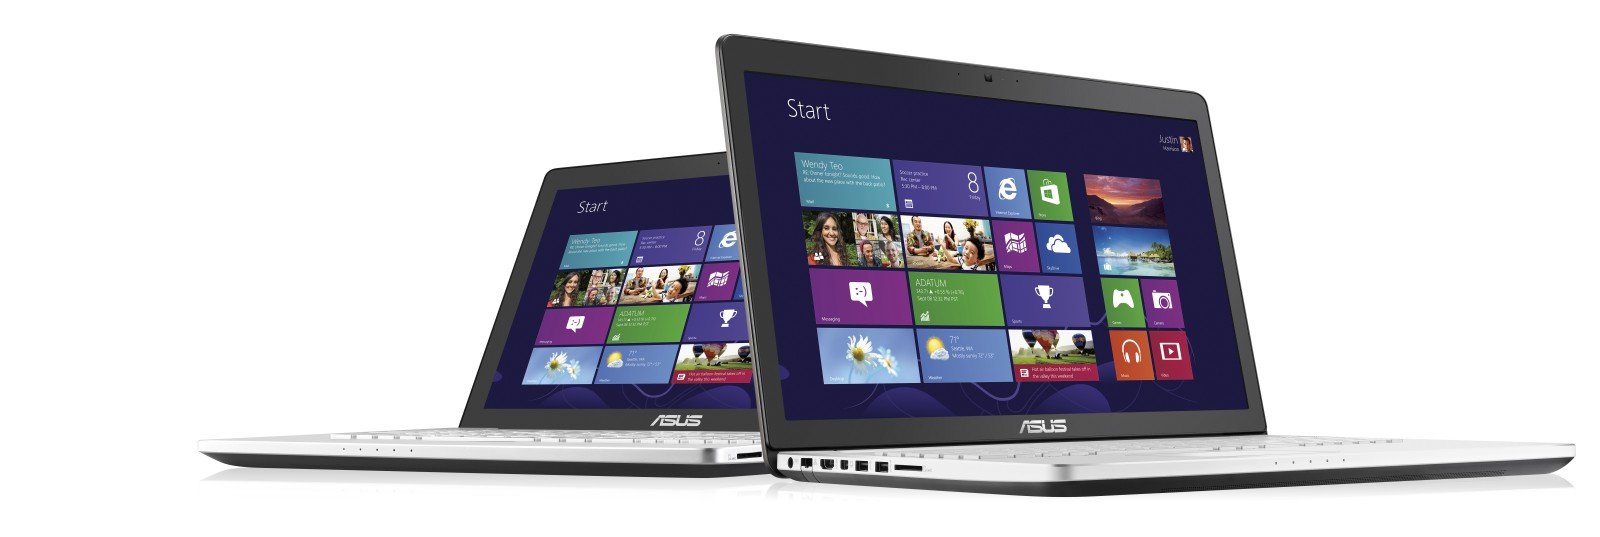 Asus N5502 & N750 Notebooks - Frontansicht